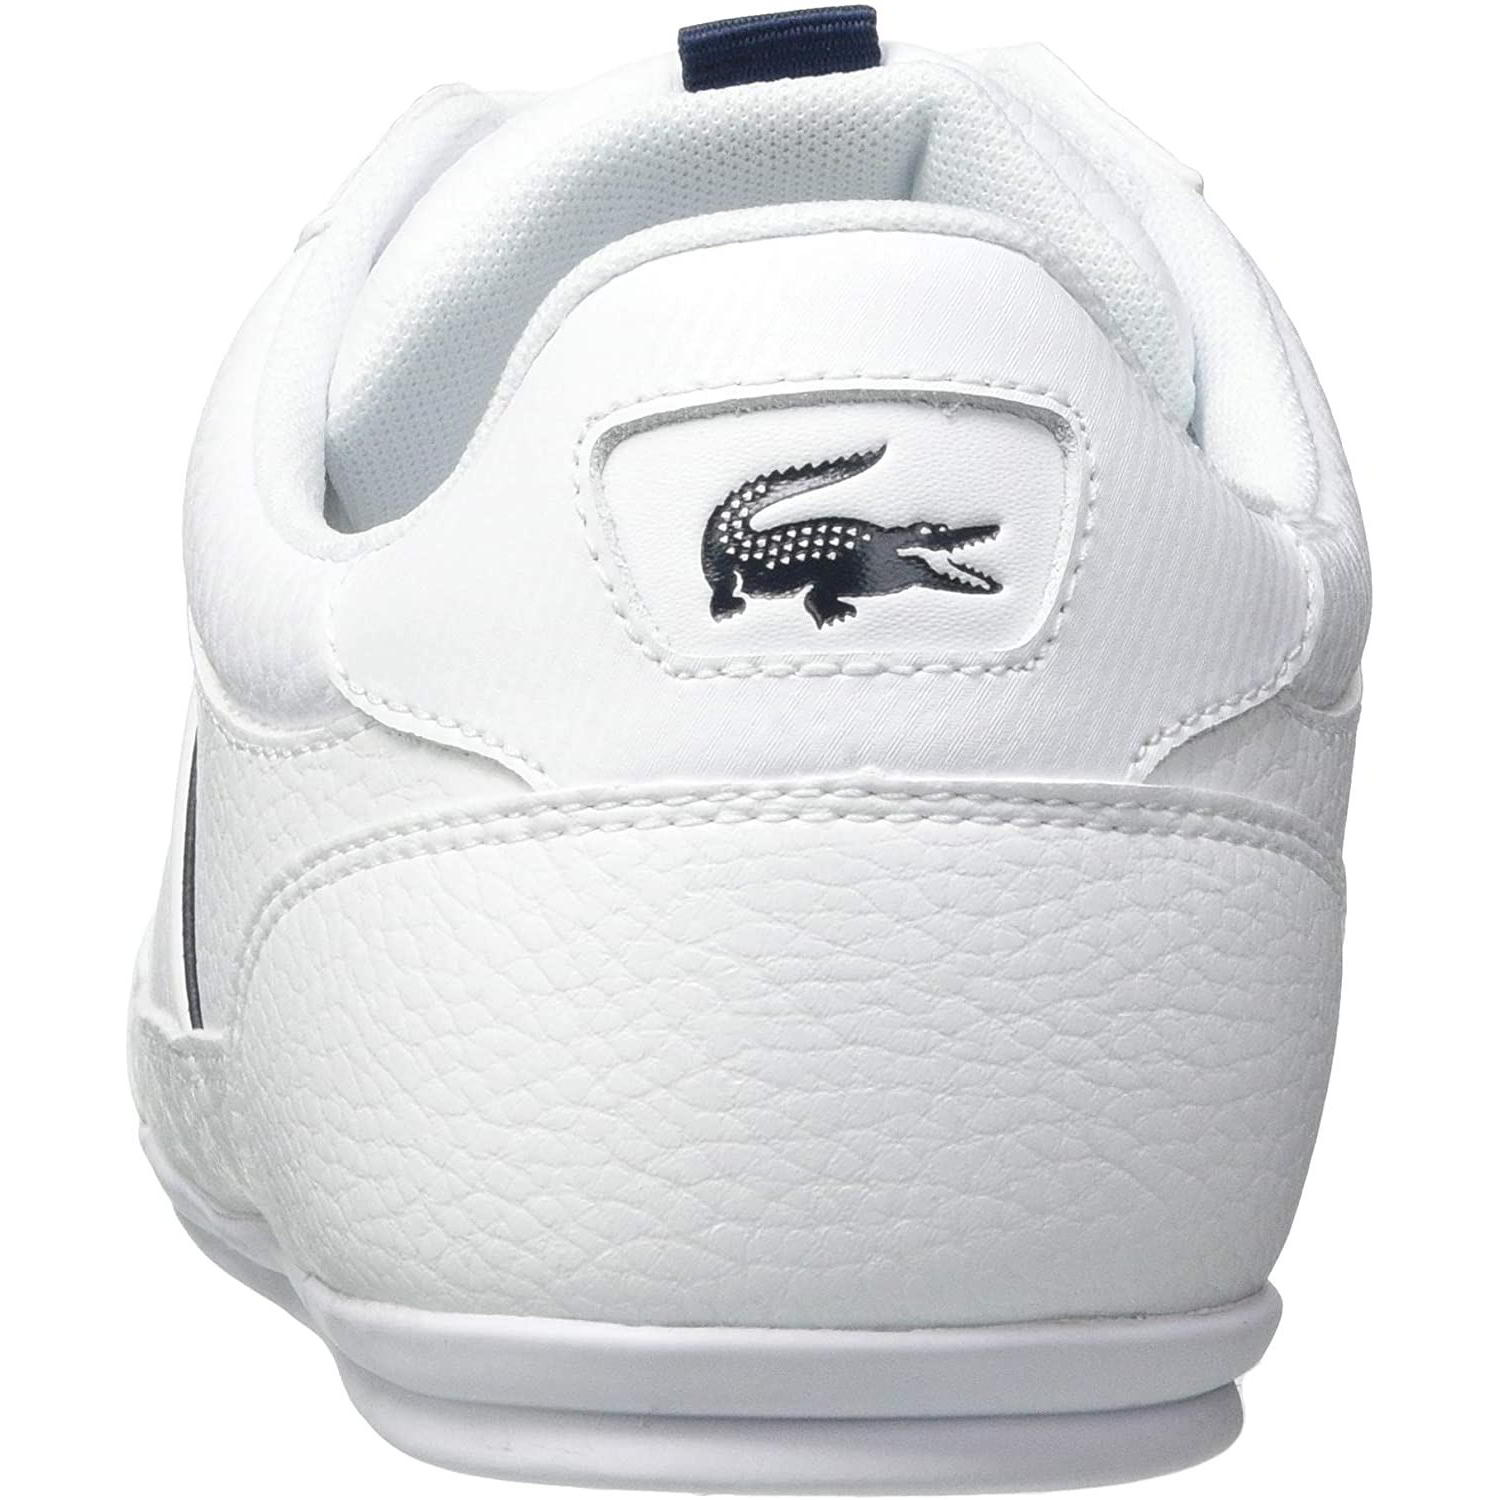 Lacoste Mens Chaymon 721-3 Tainers - White Navy 2951